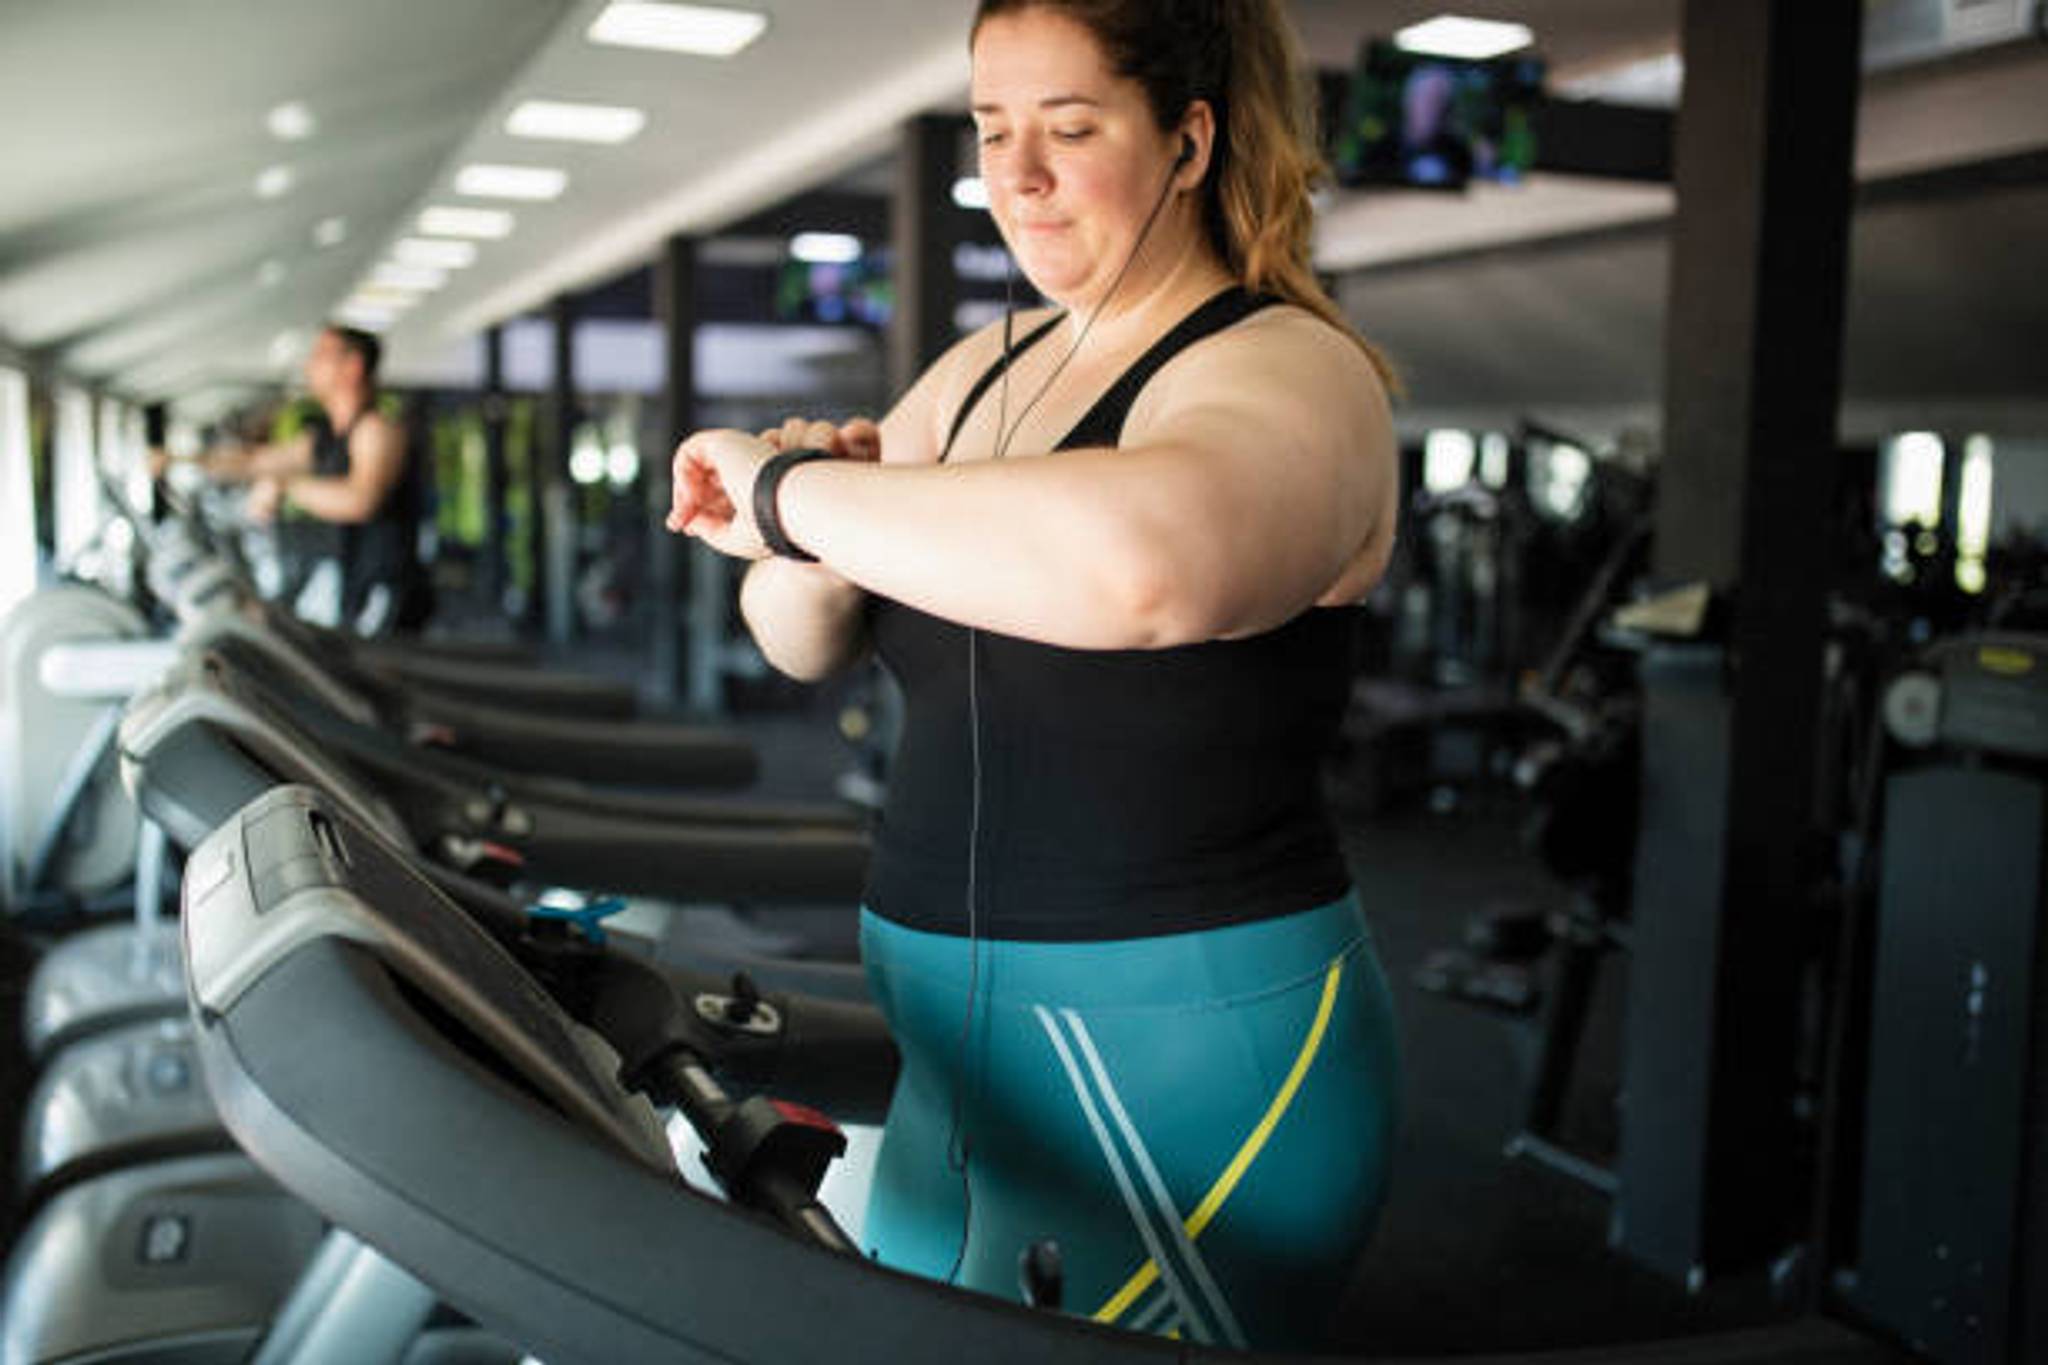 Fat C*n't campaign speaks to body diversity in cycling